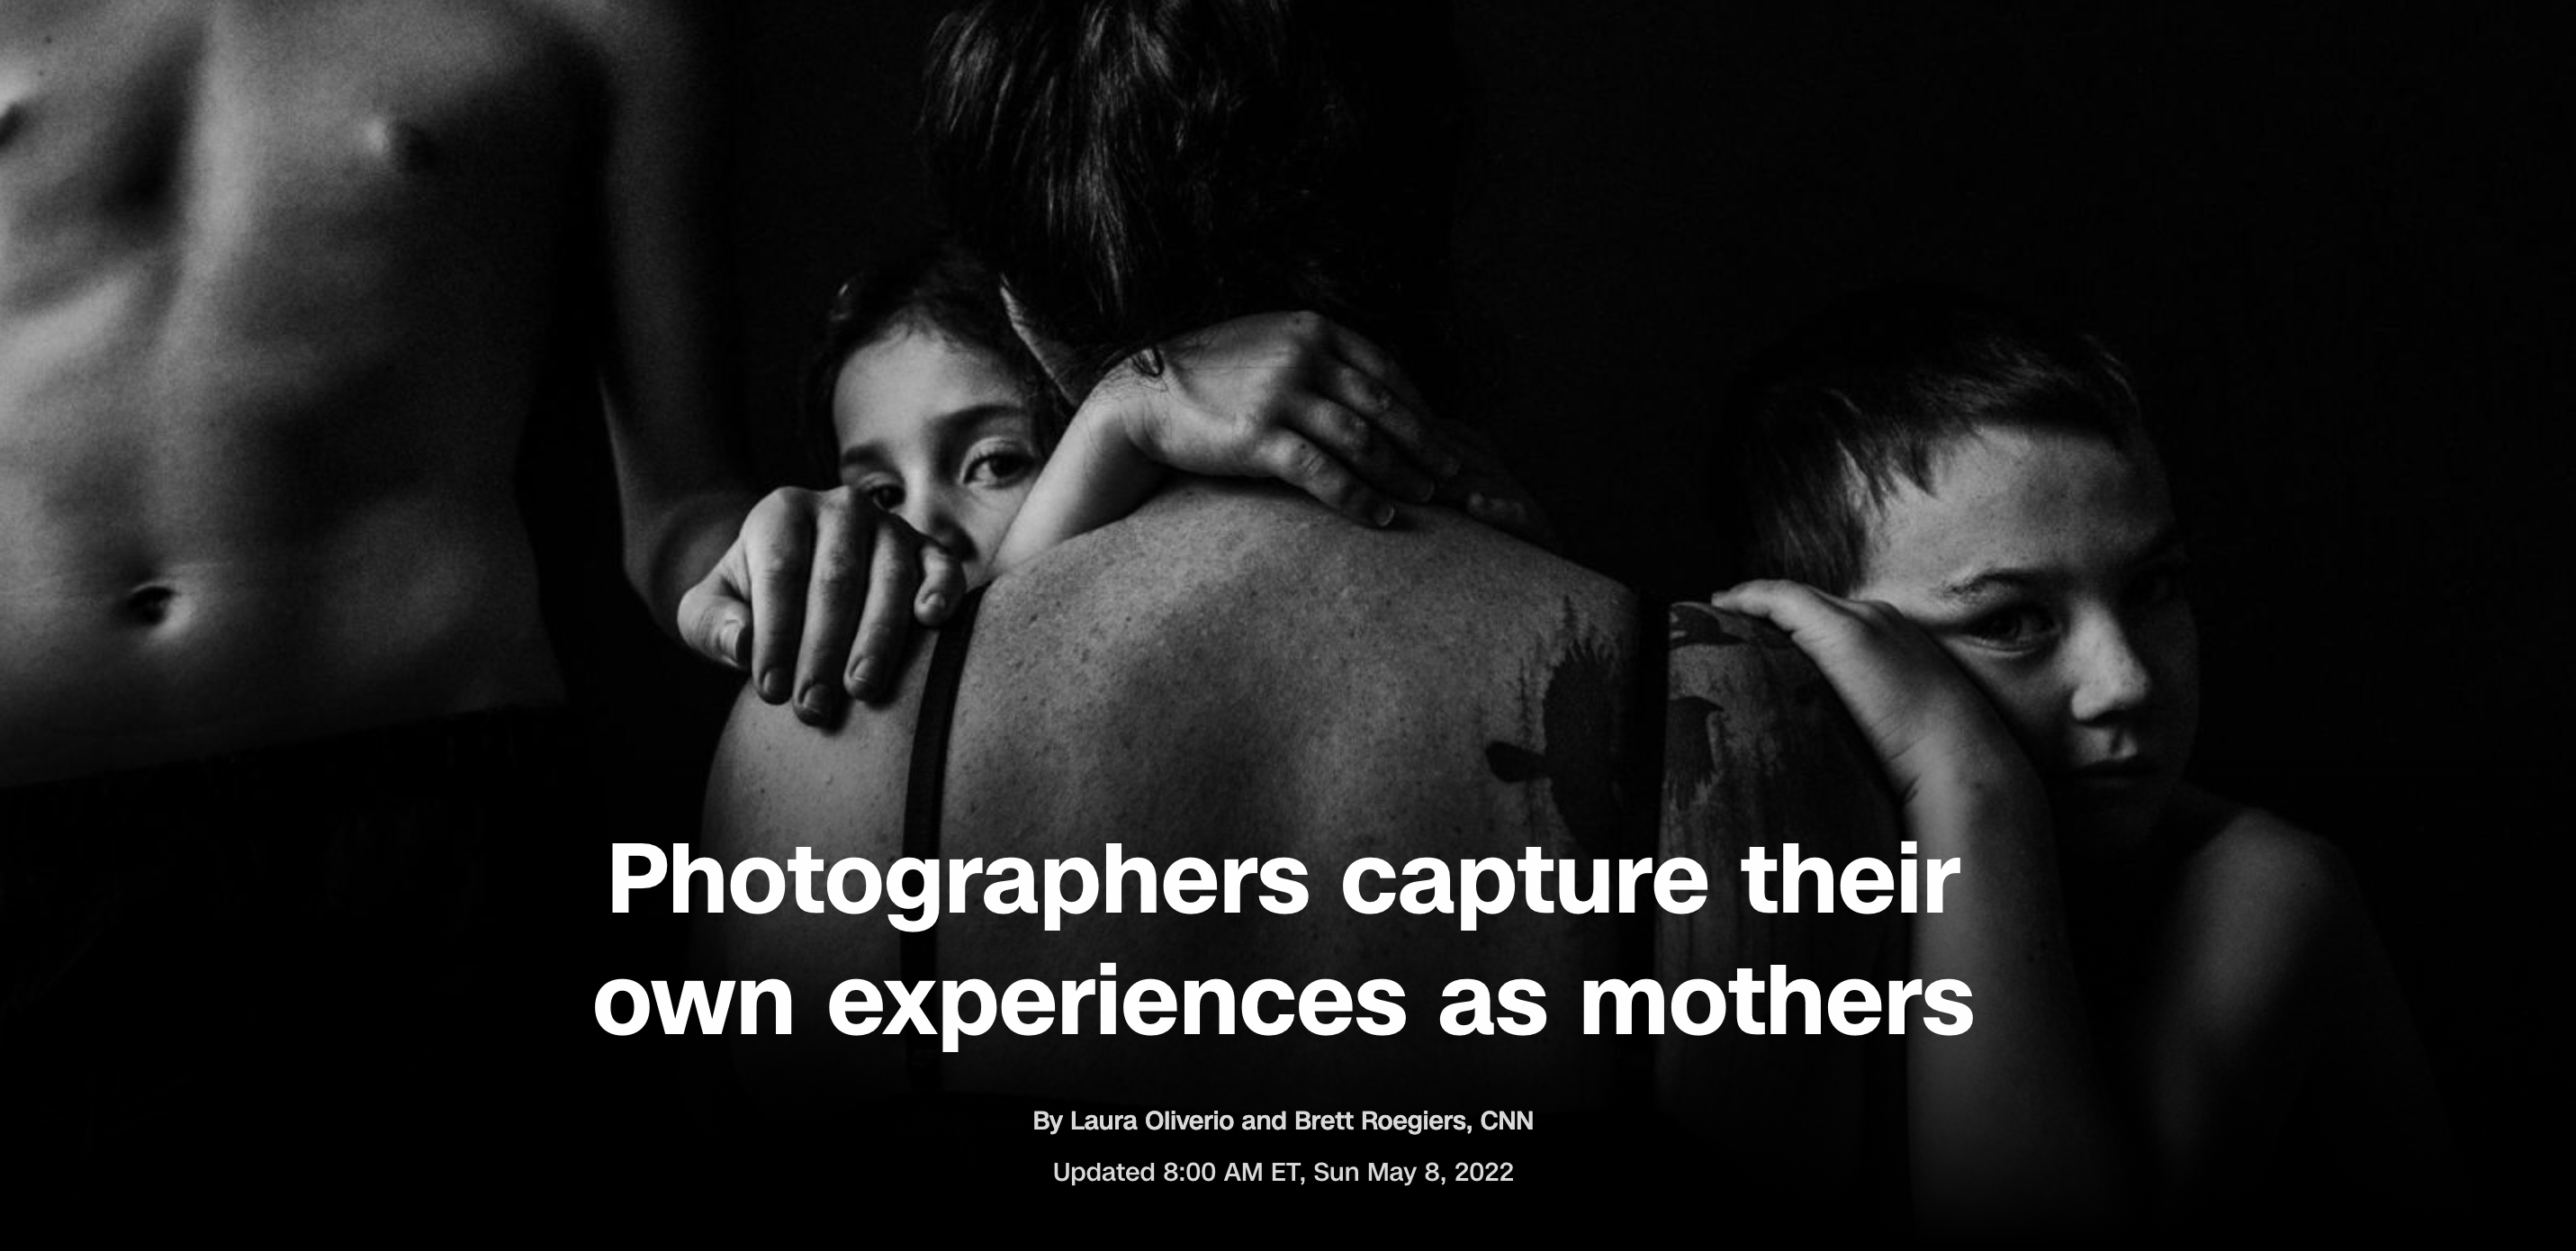 Thumbnail of CNN: Photographers capture their own experiences as mothers